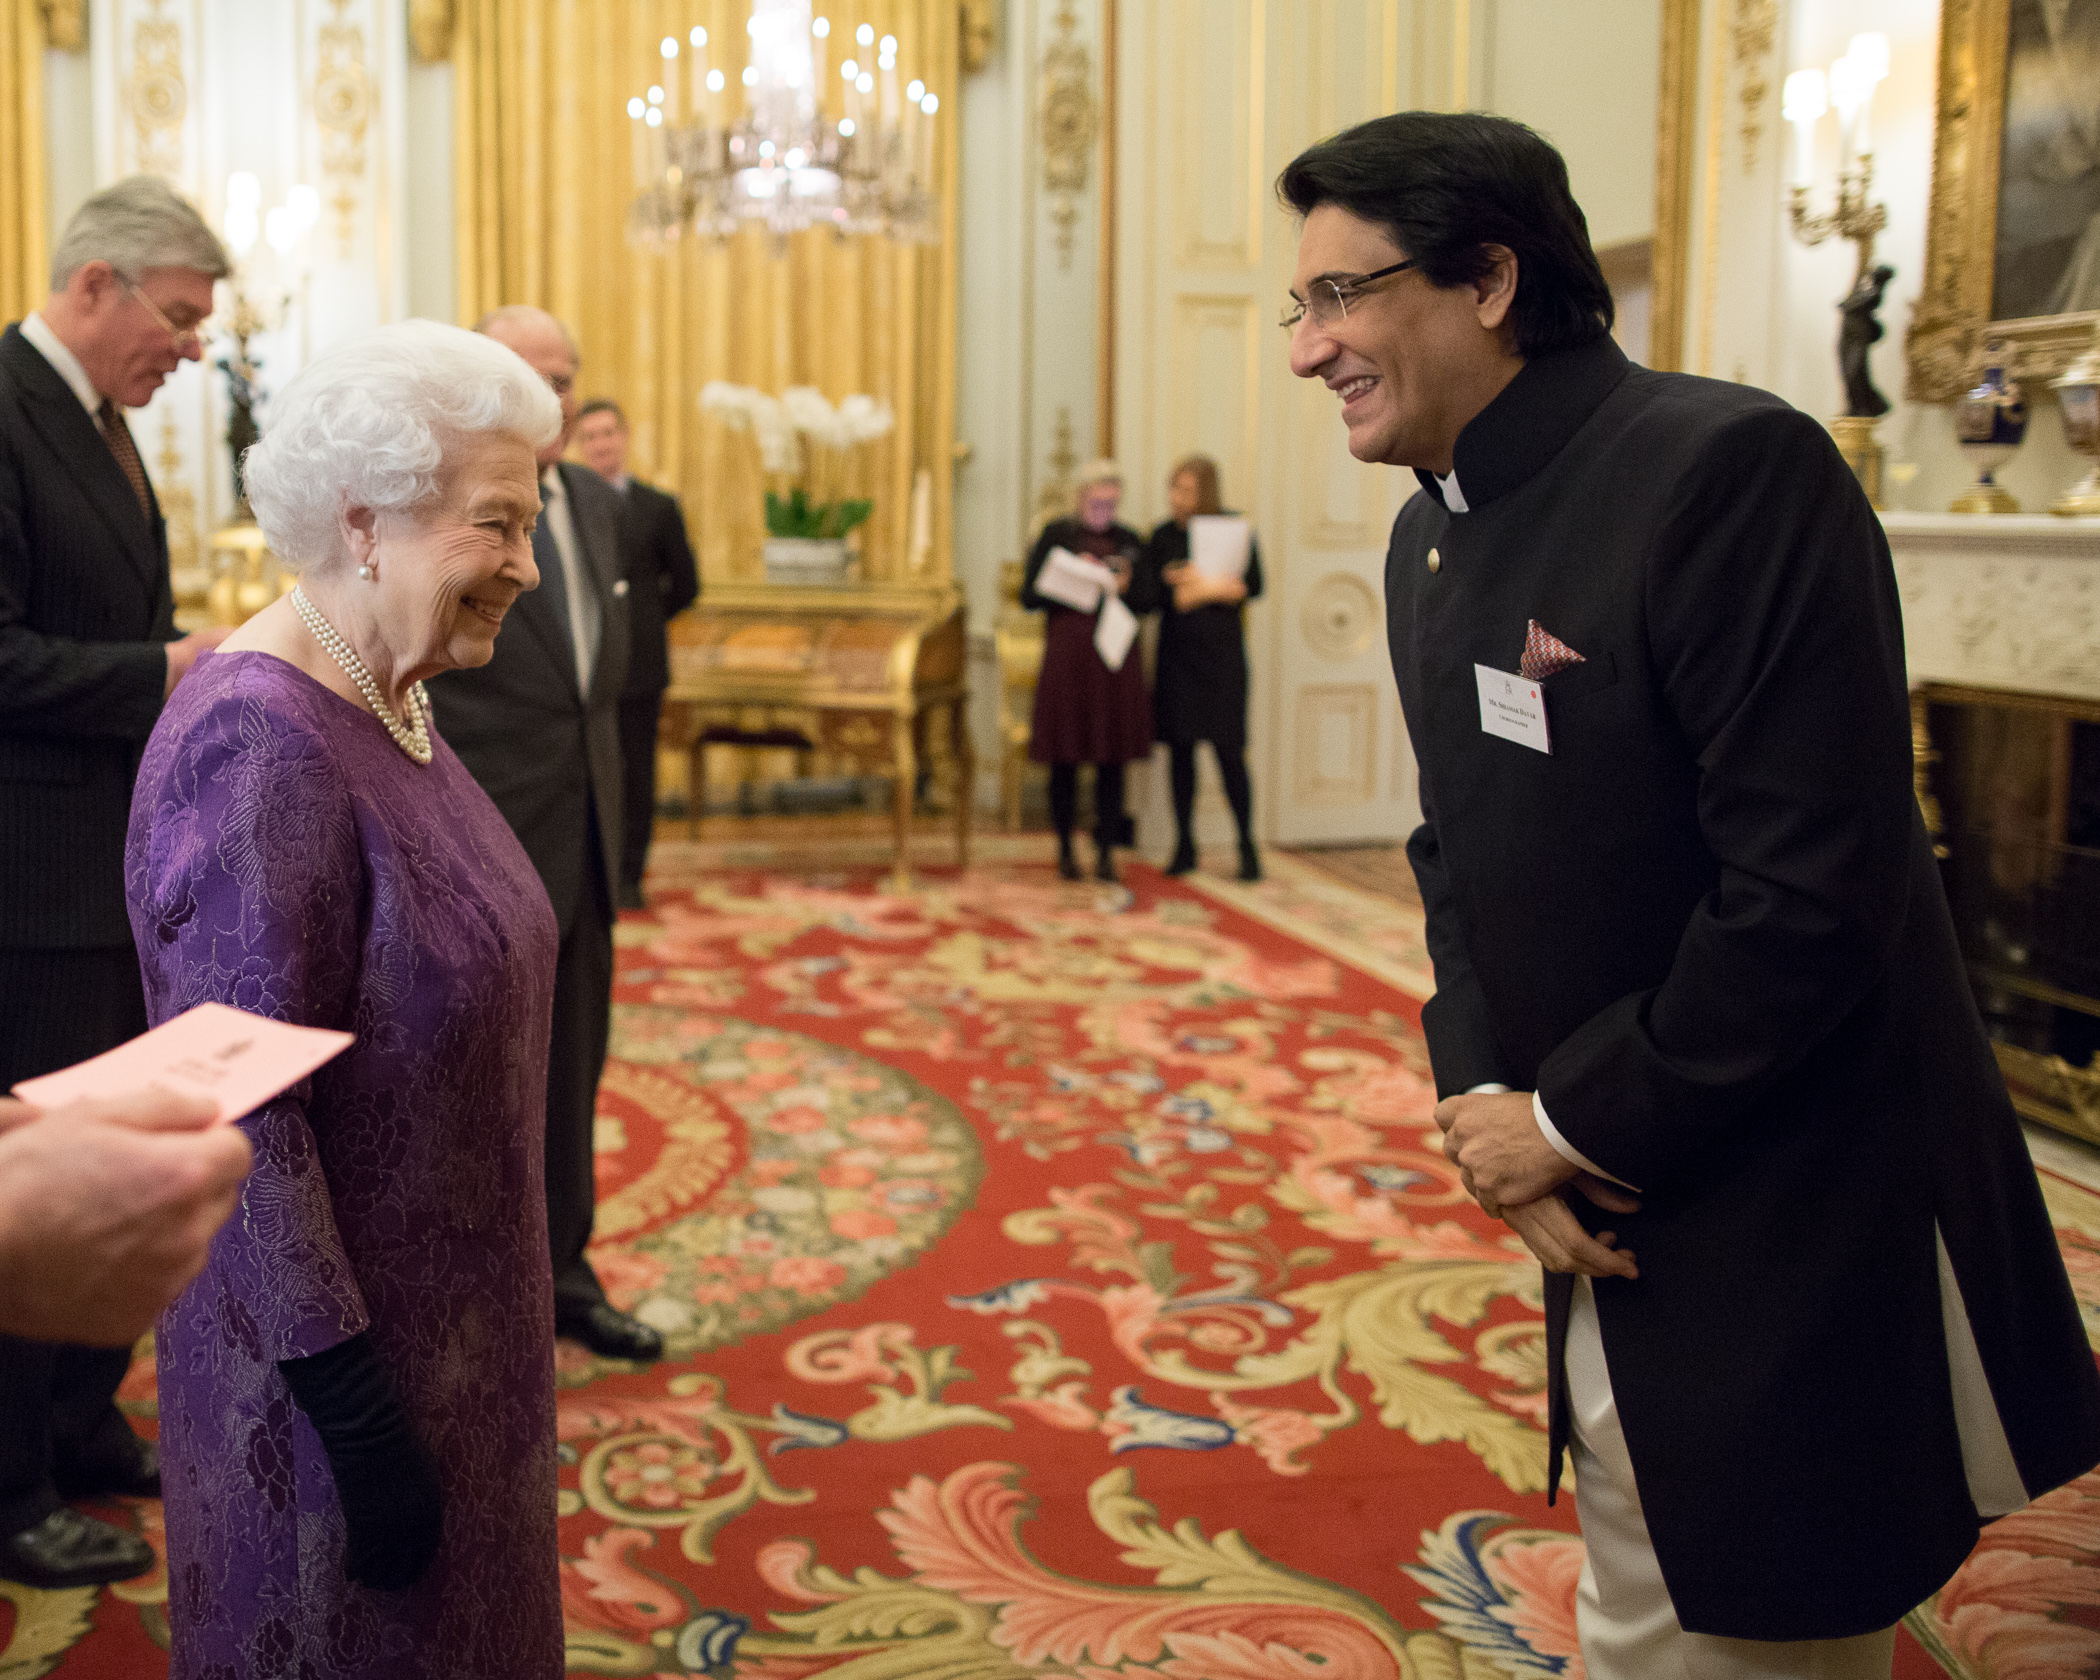 You are currently viewing Shiamak Davar truly humbled and honored with the opportunity to meet The Queen at The Buckingham Palace